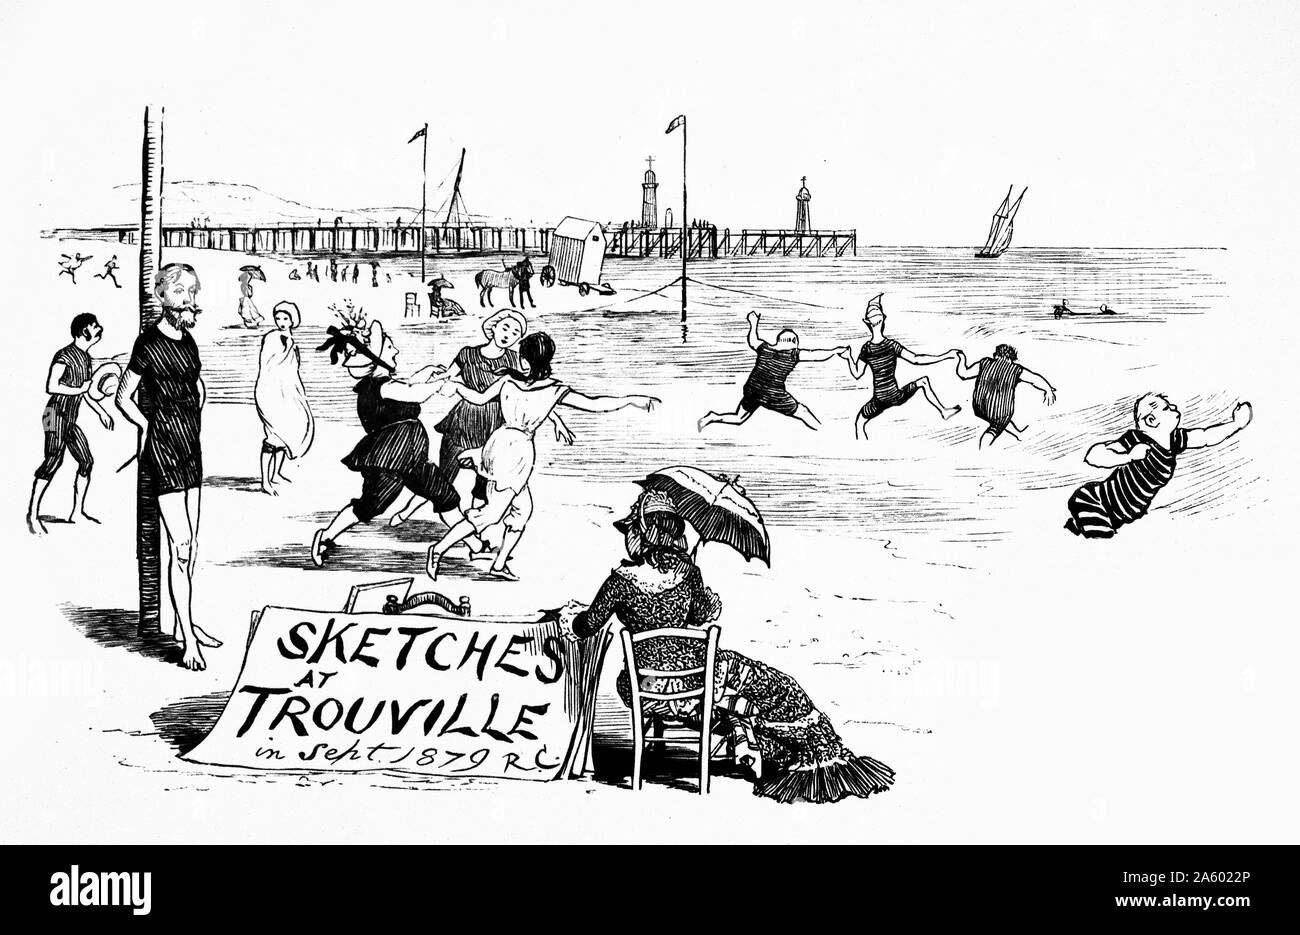 Illustration shows French people enjoying summer on the Trouville-sur-Mer beach. A crowd of individuals are shown playing in the sea, while a female figure offers sketches in the foreground. Dated 1877 Stock Photo